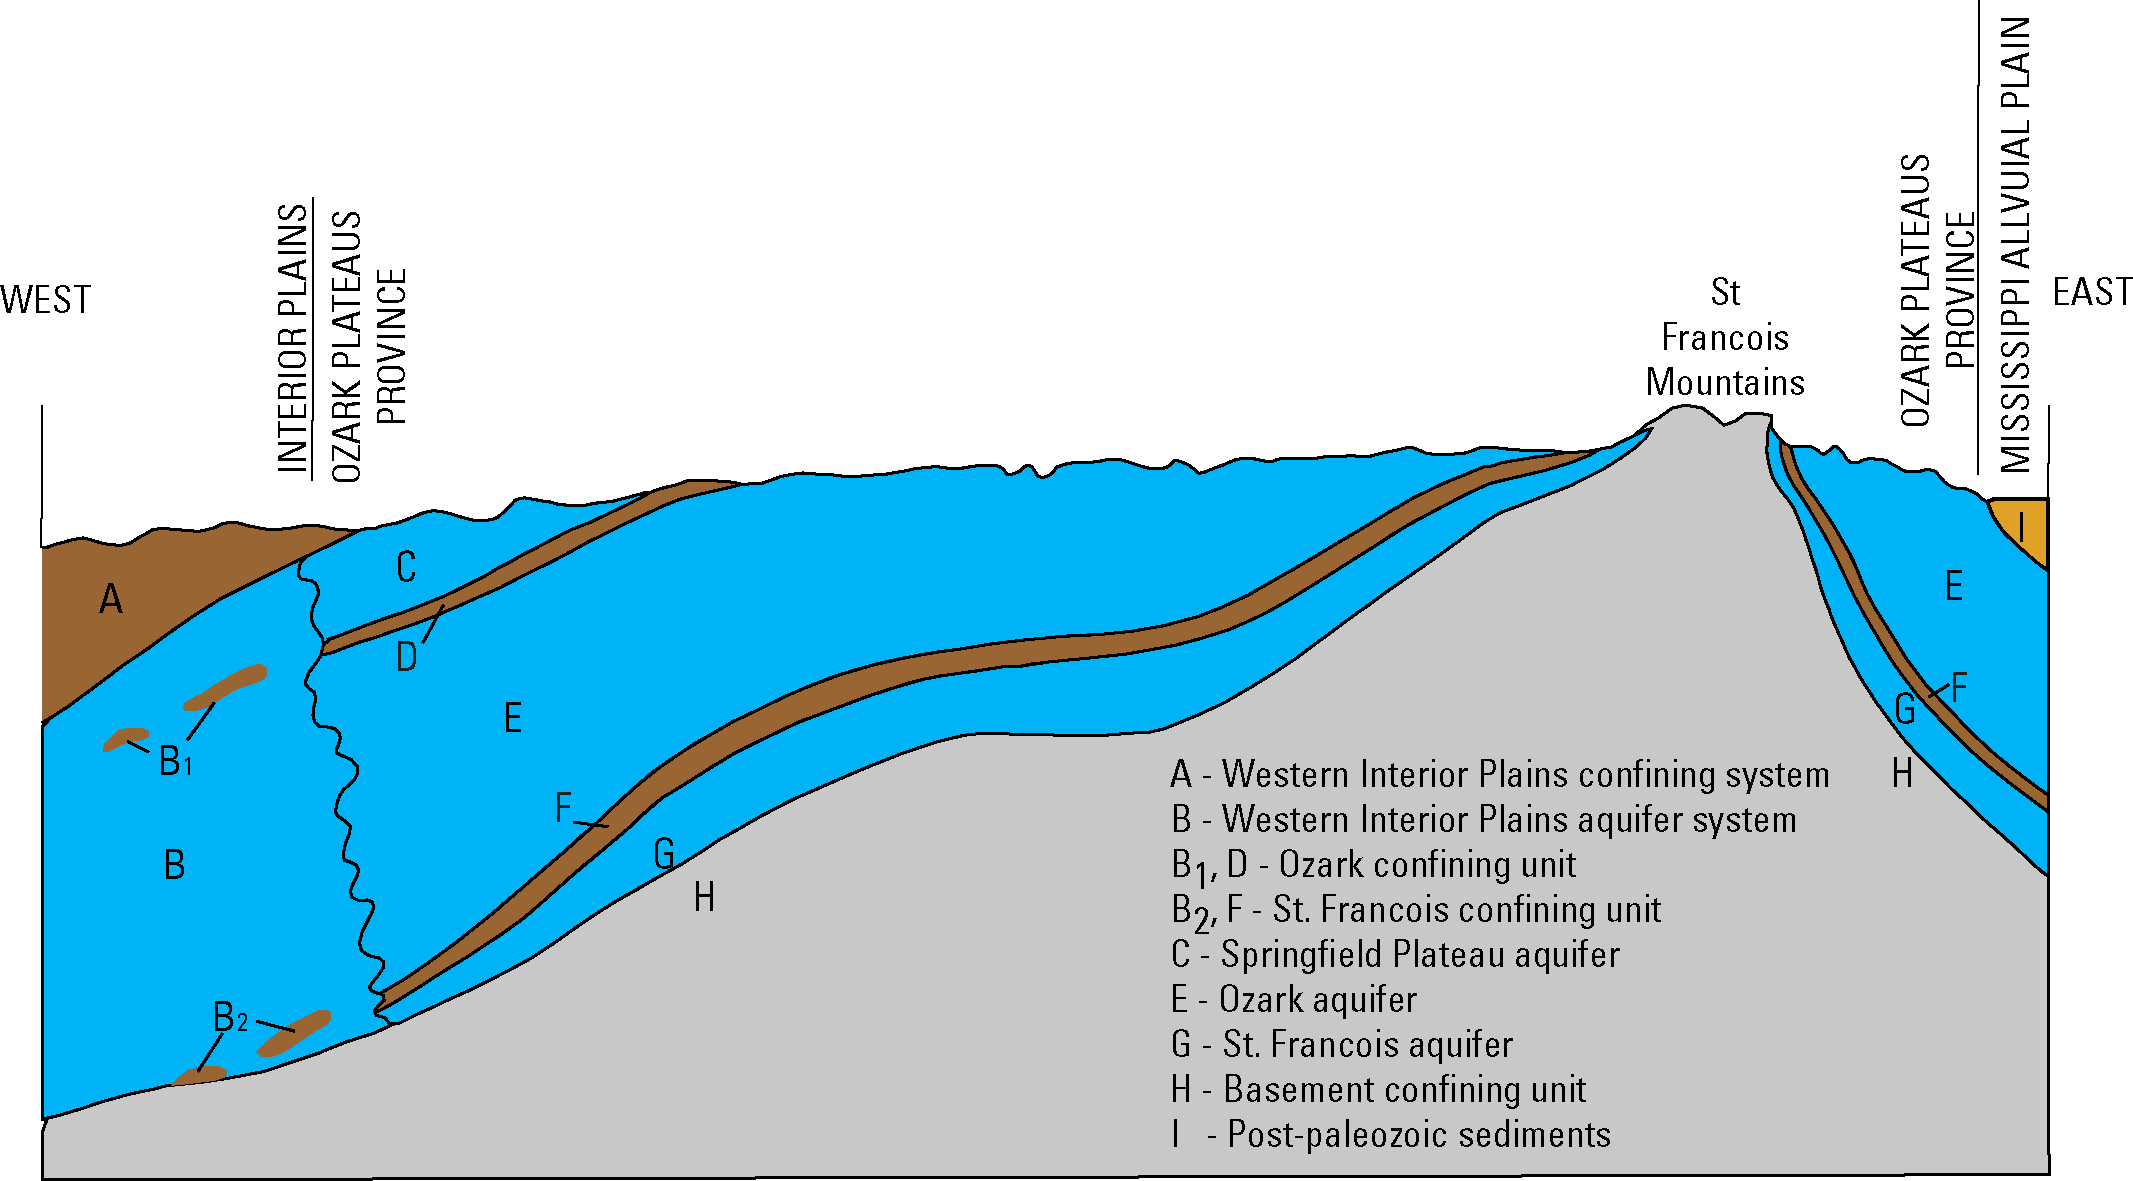 Groundwater use